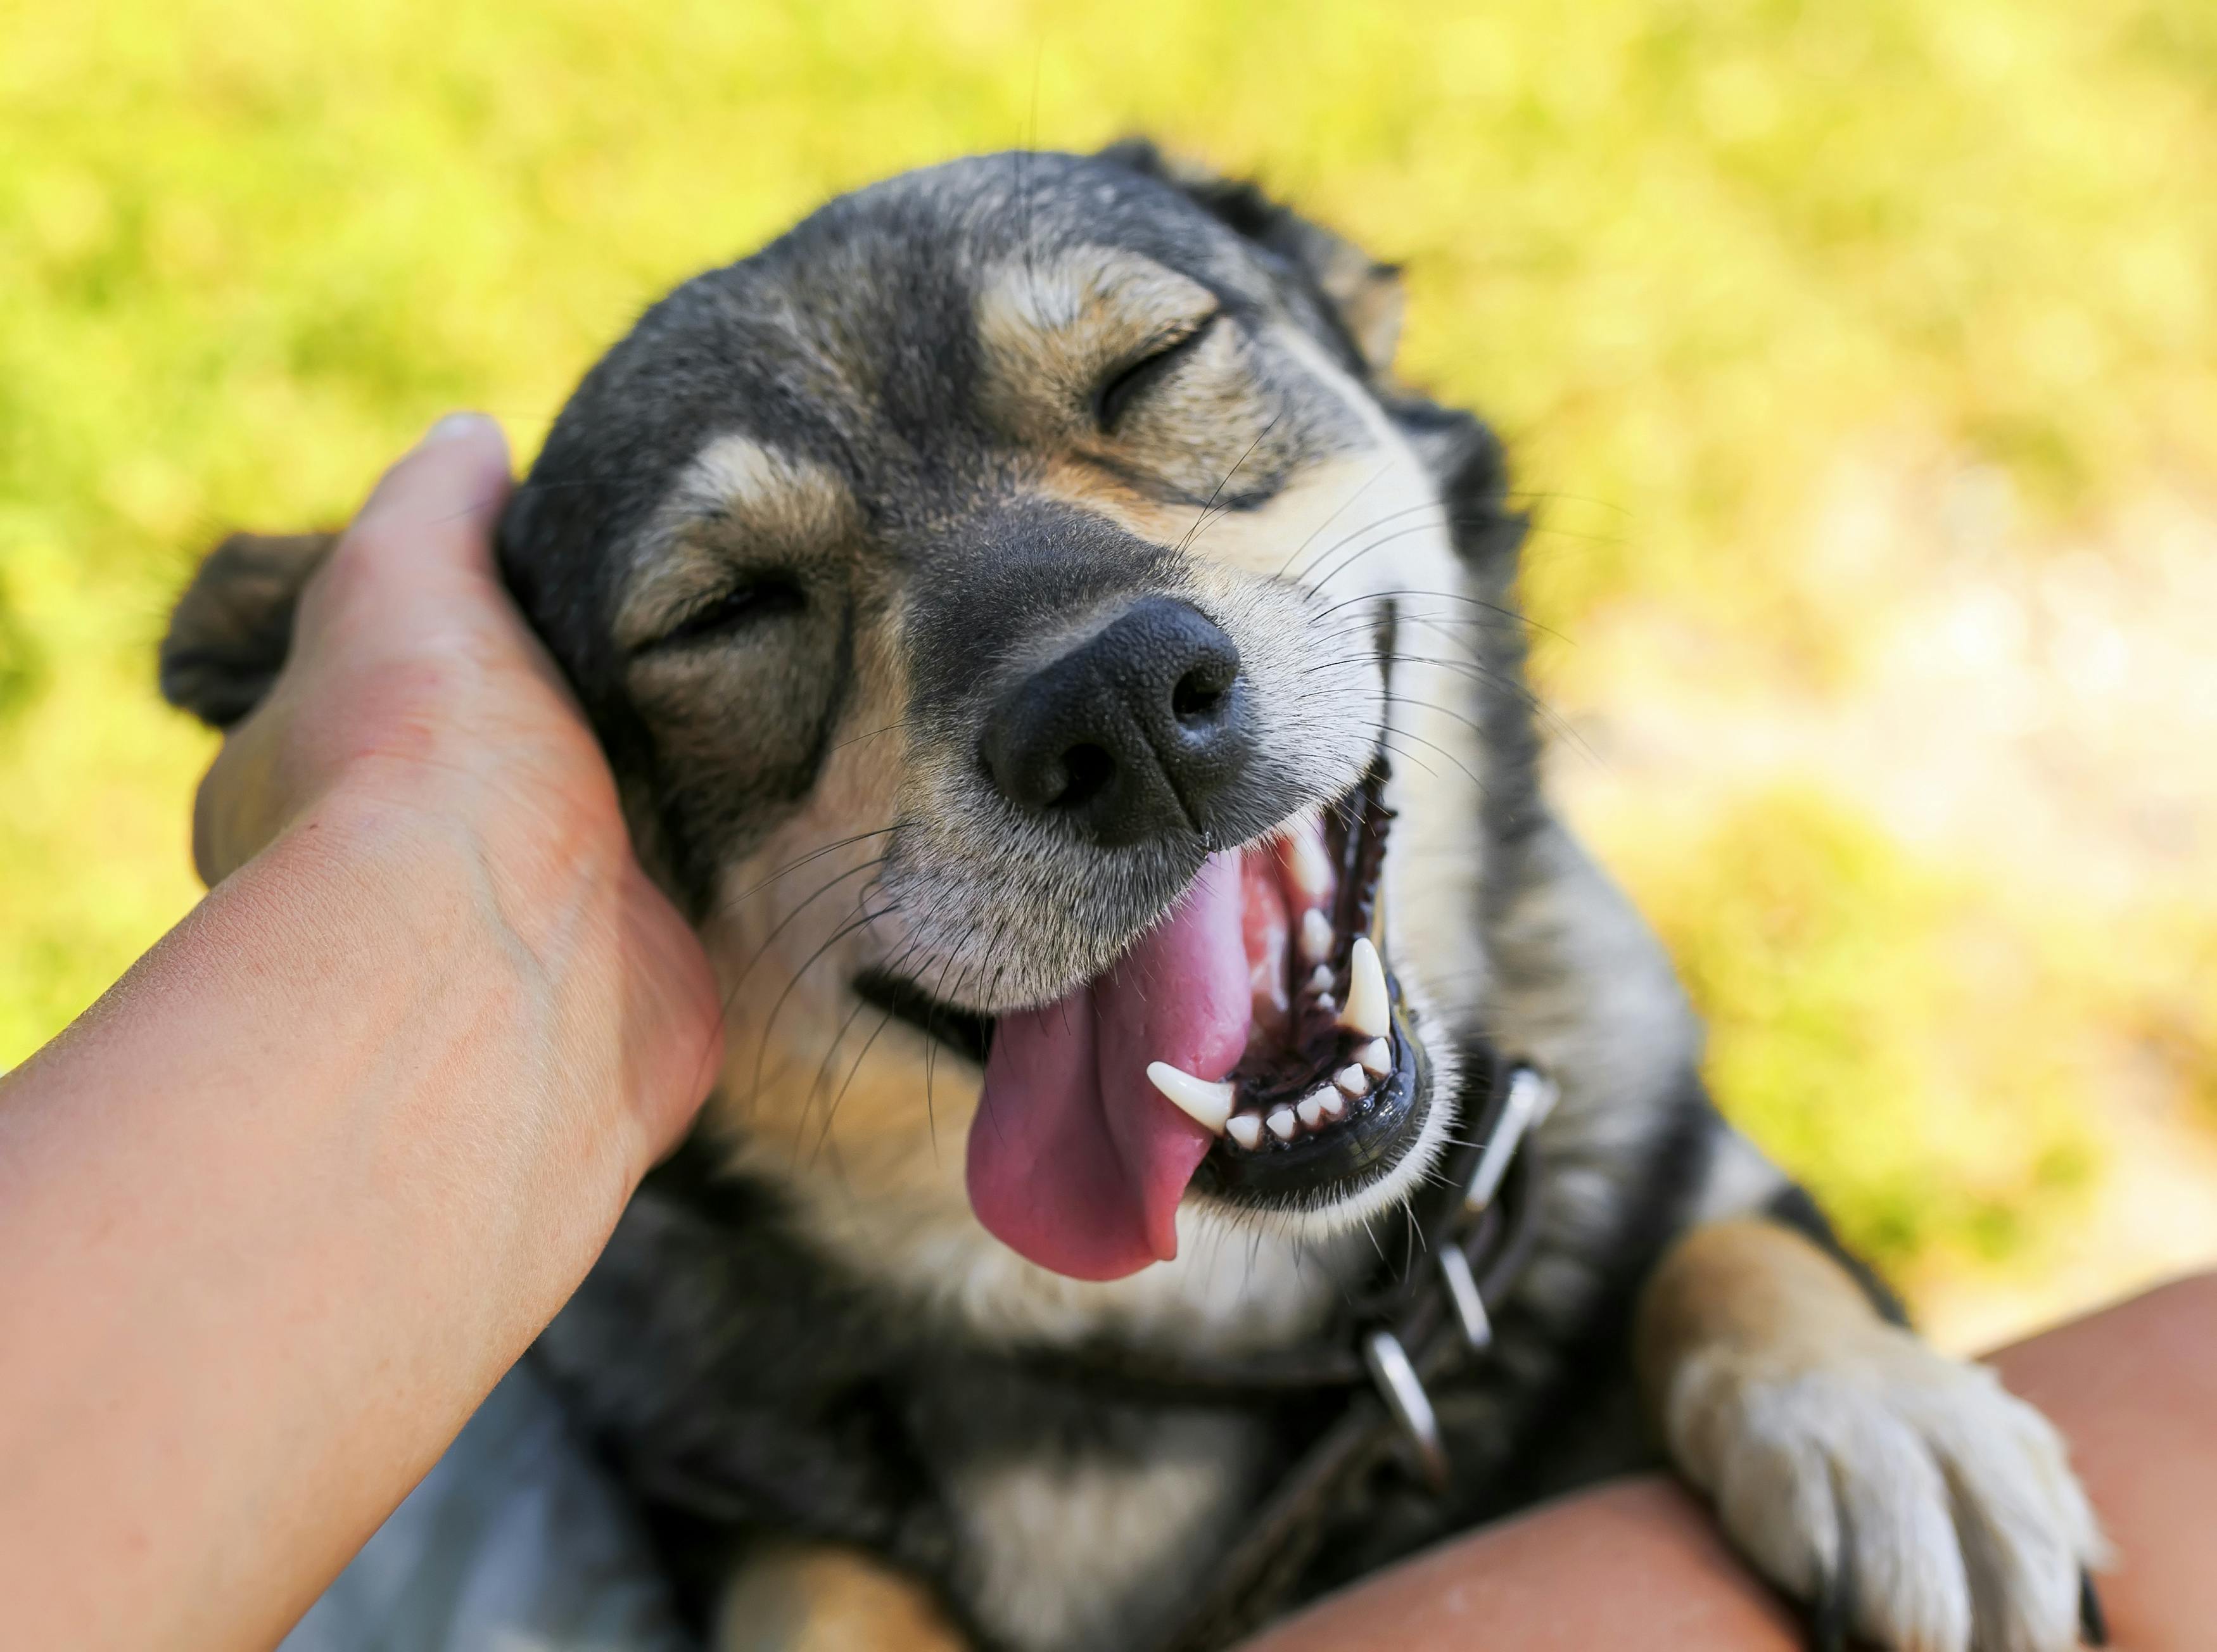 Smiling dog getting a scratch behind the ear.